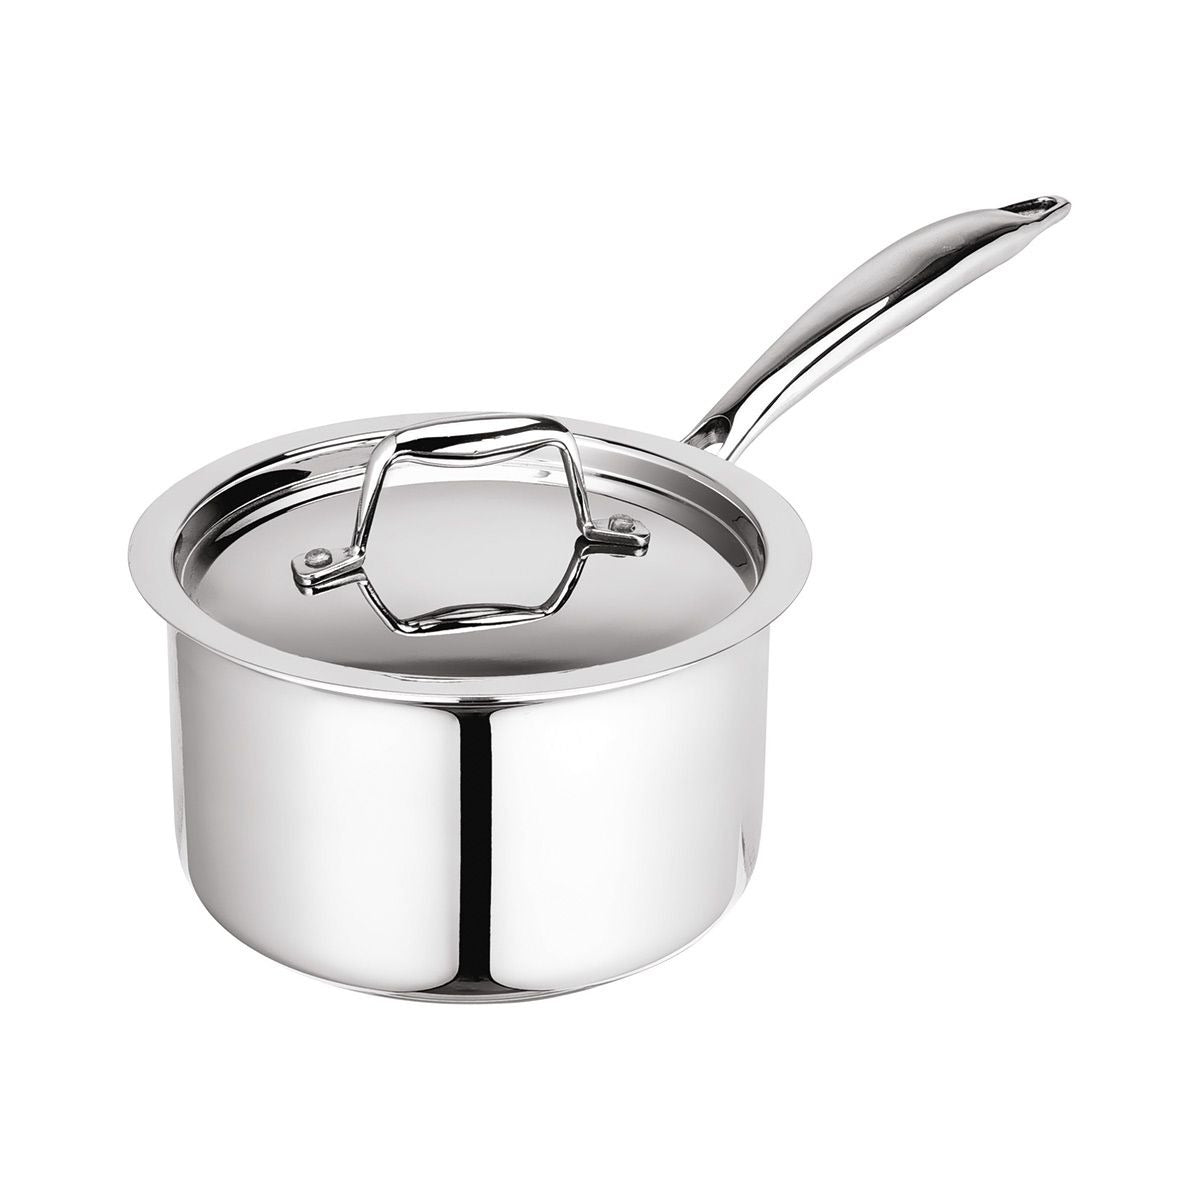 Artista Tri Ply Saucepan With Lid